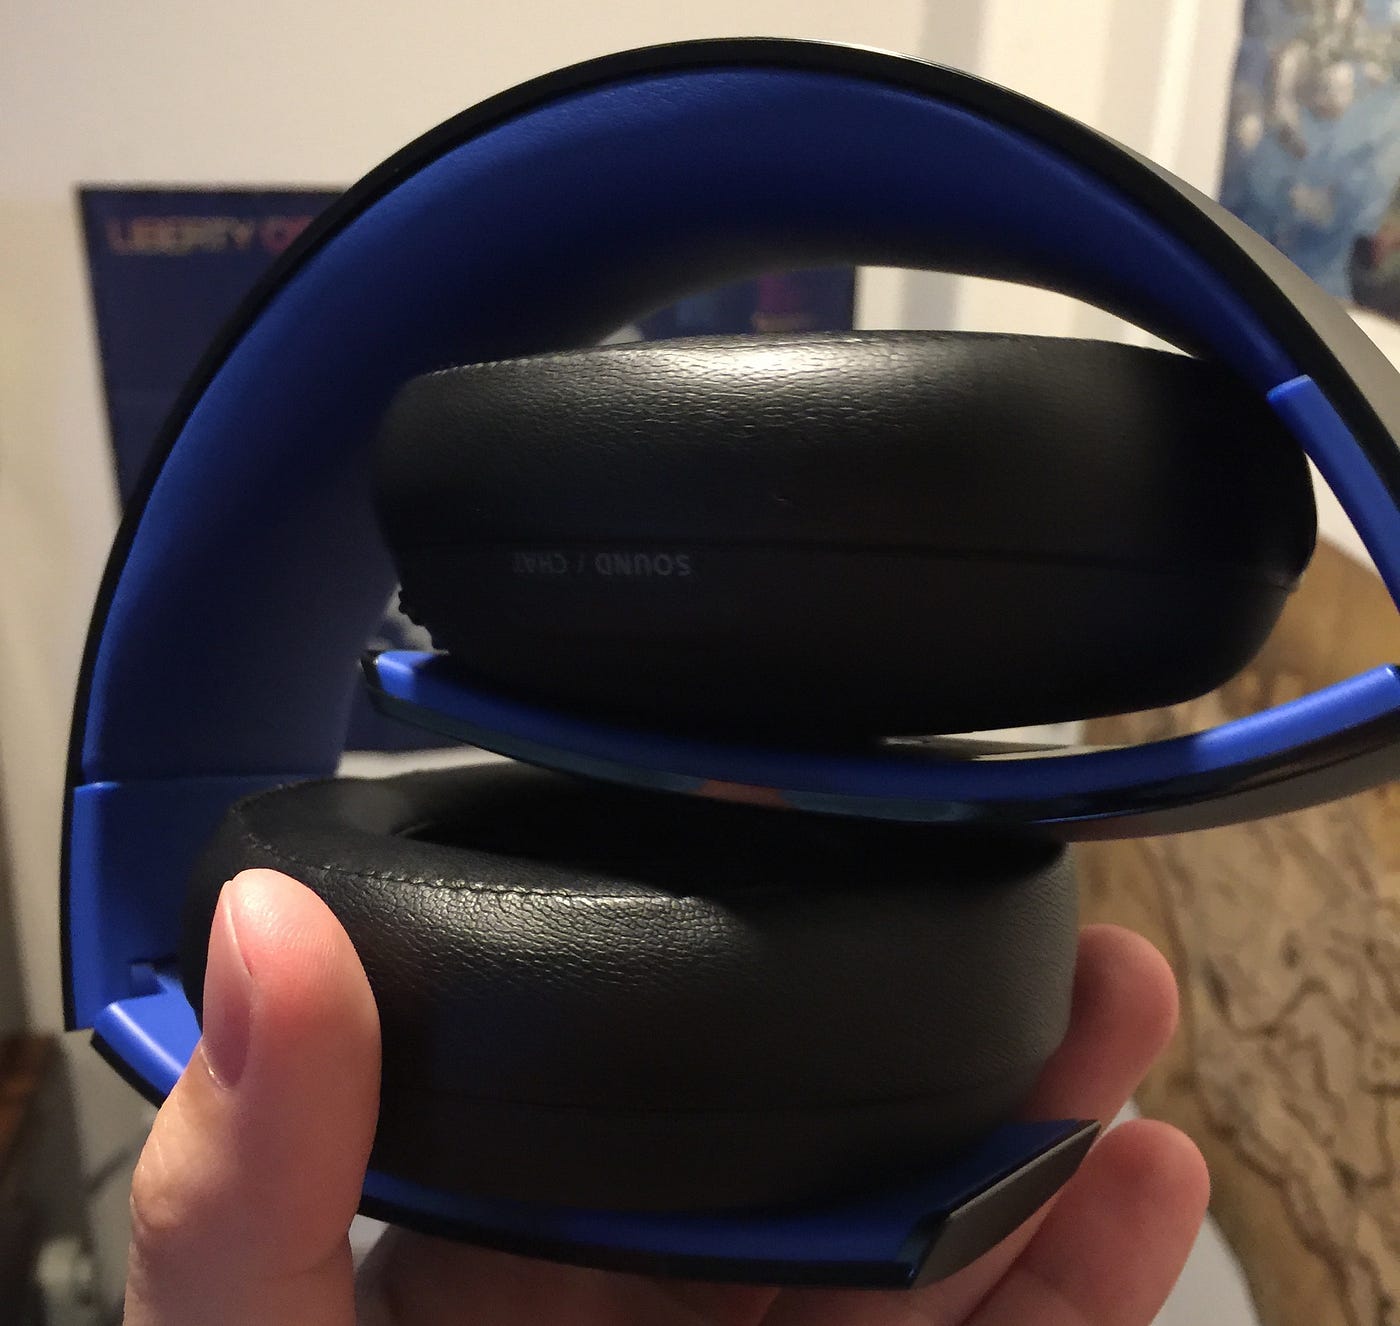 Sony Playstation Gold Wireless Headset Review: Surround so capable, it makes Microsoft silly. | by Alex Rowe | Medium